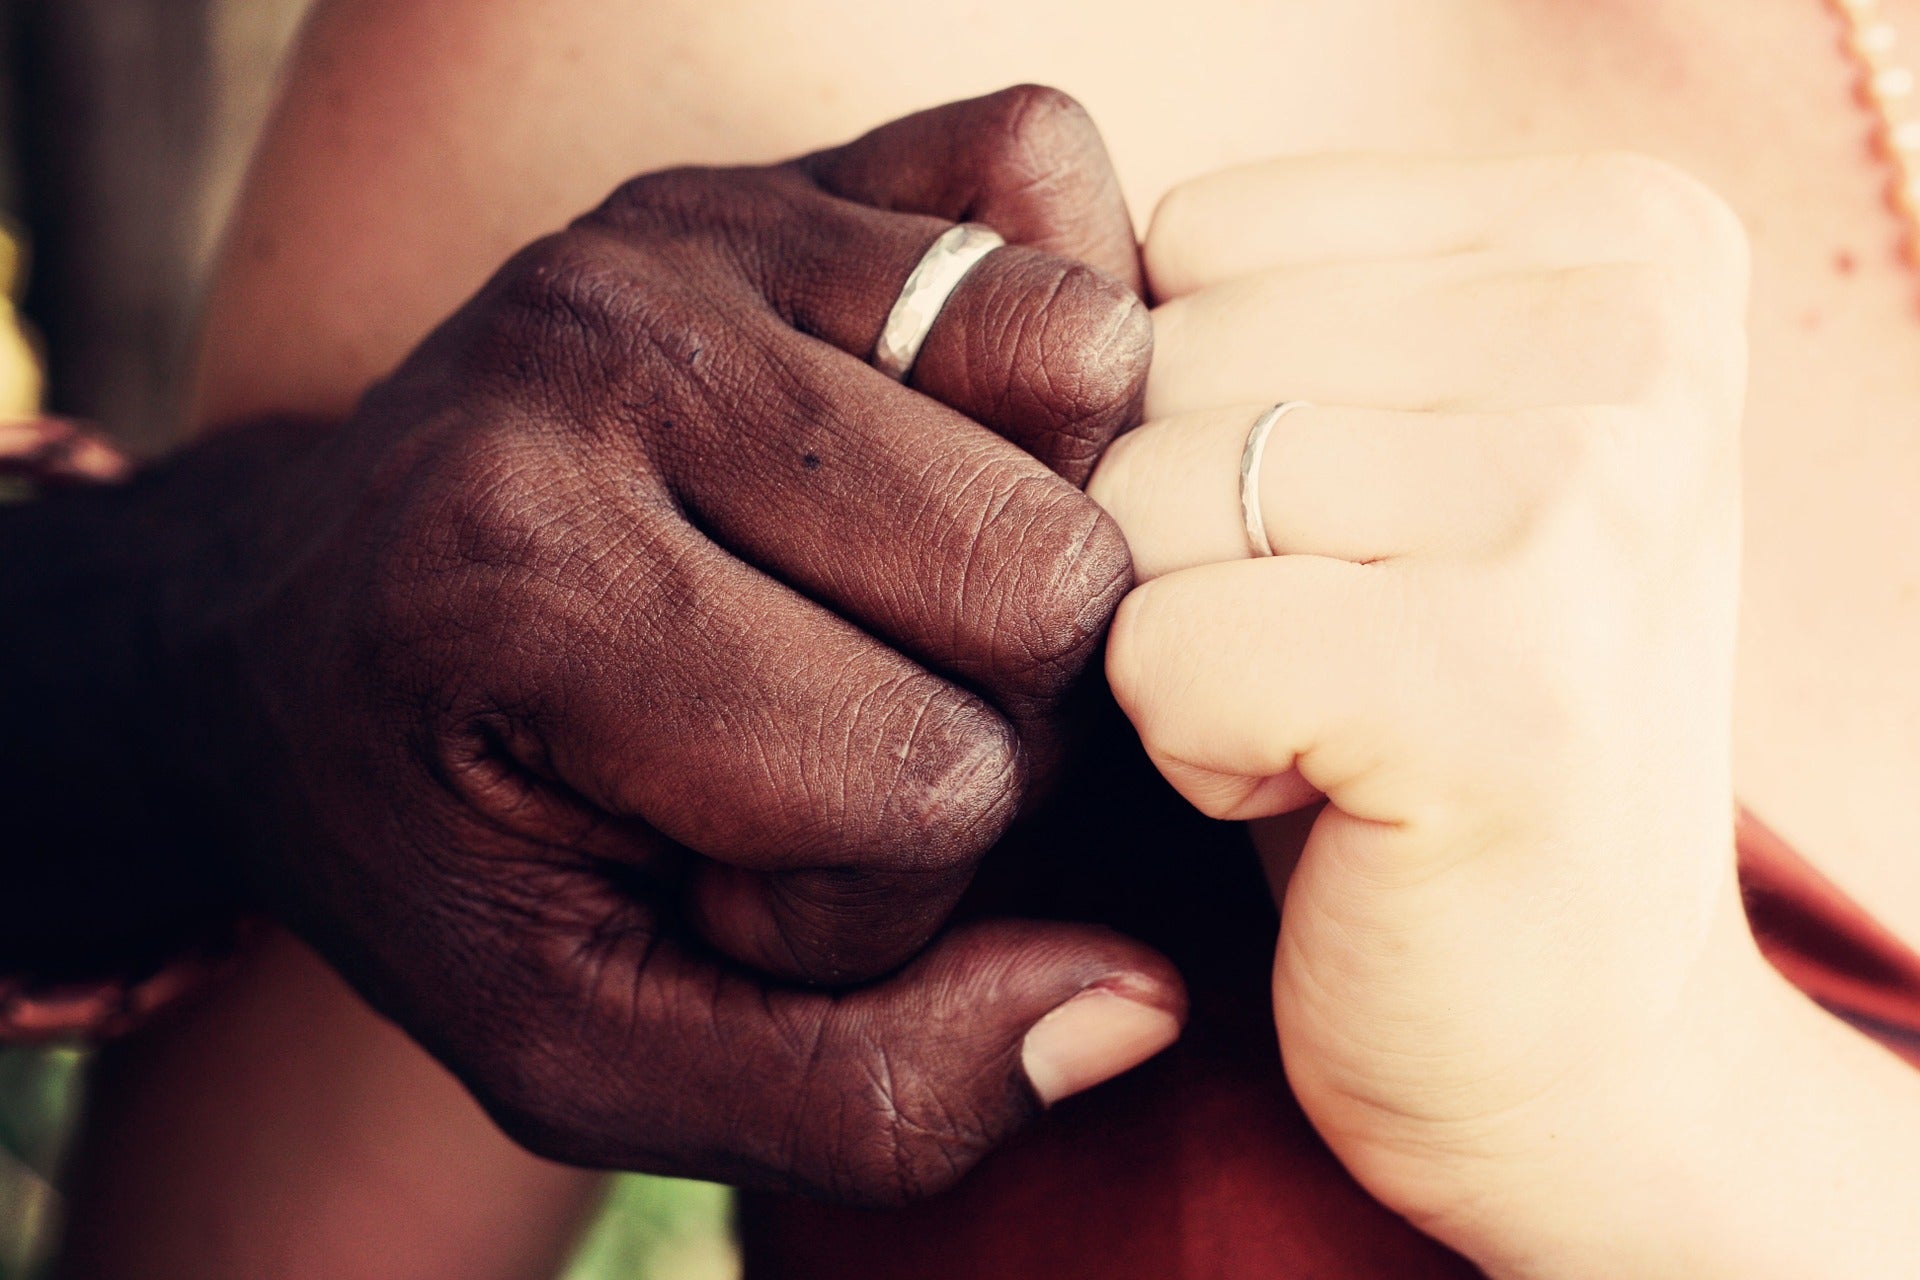 Are People Really Okay With Interracial Marriage? The Brain Could Provide Some Answers